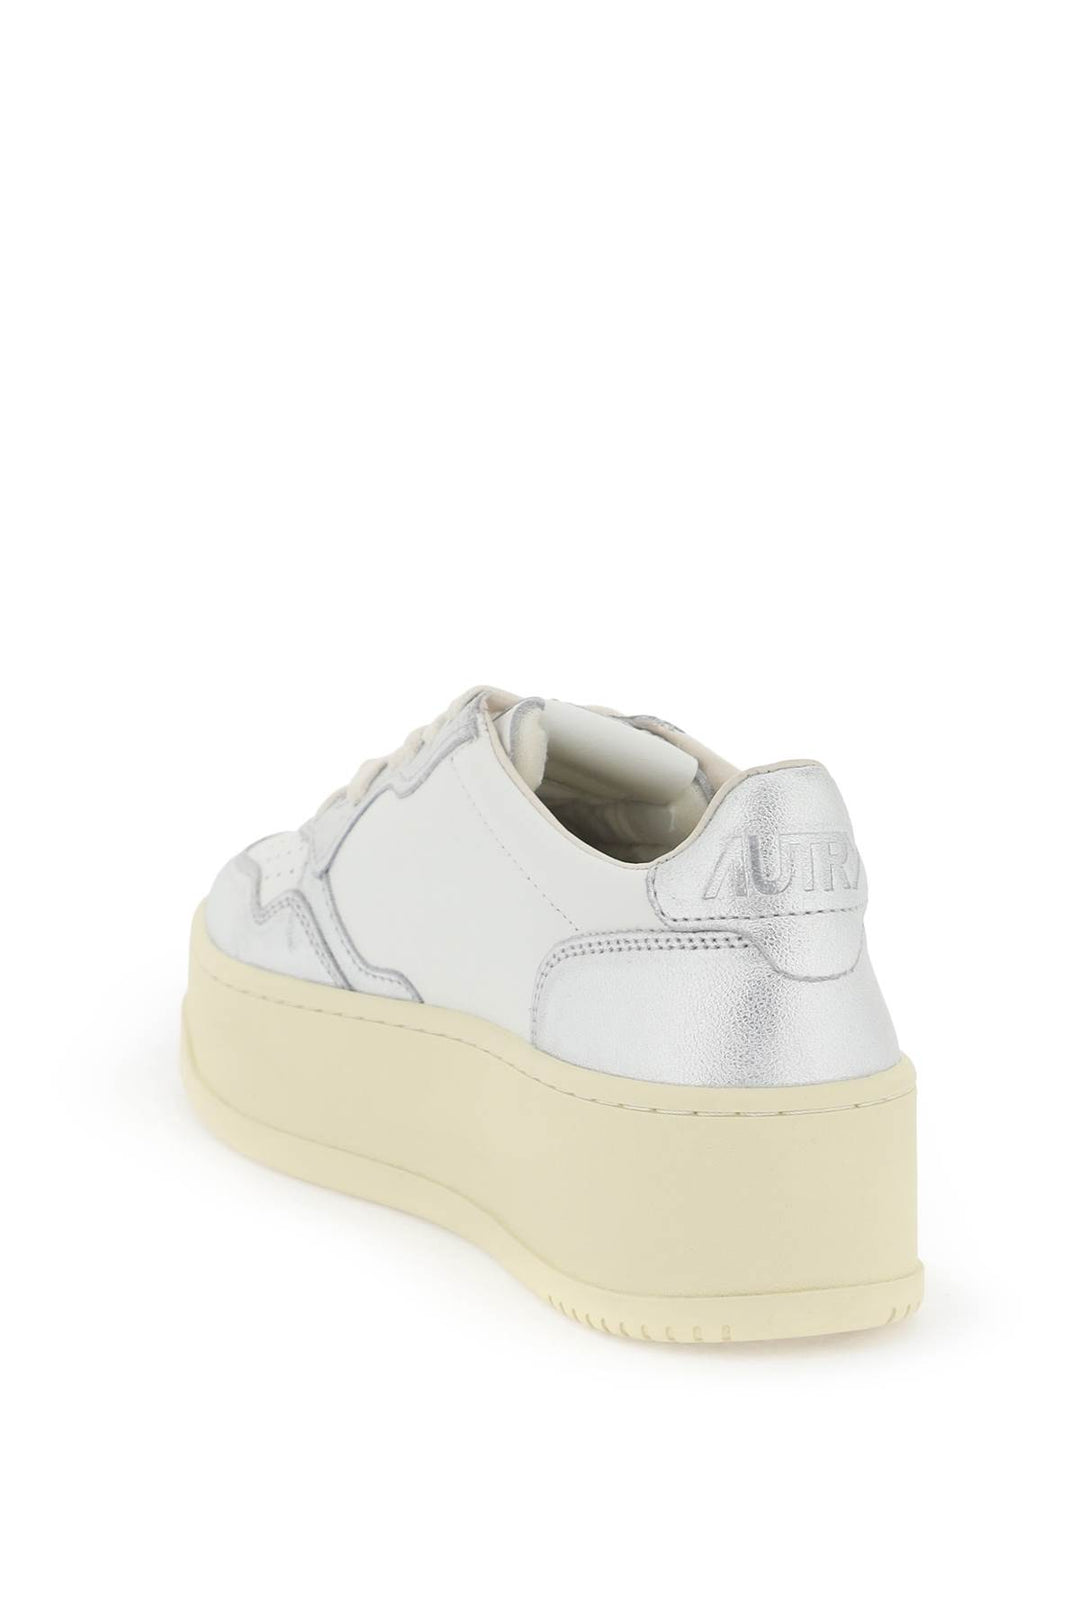 Autry Medalist Low Sneakers   Argento